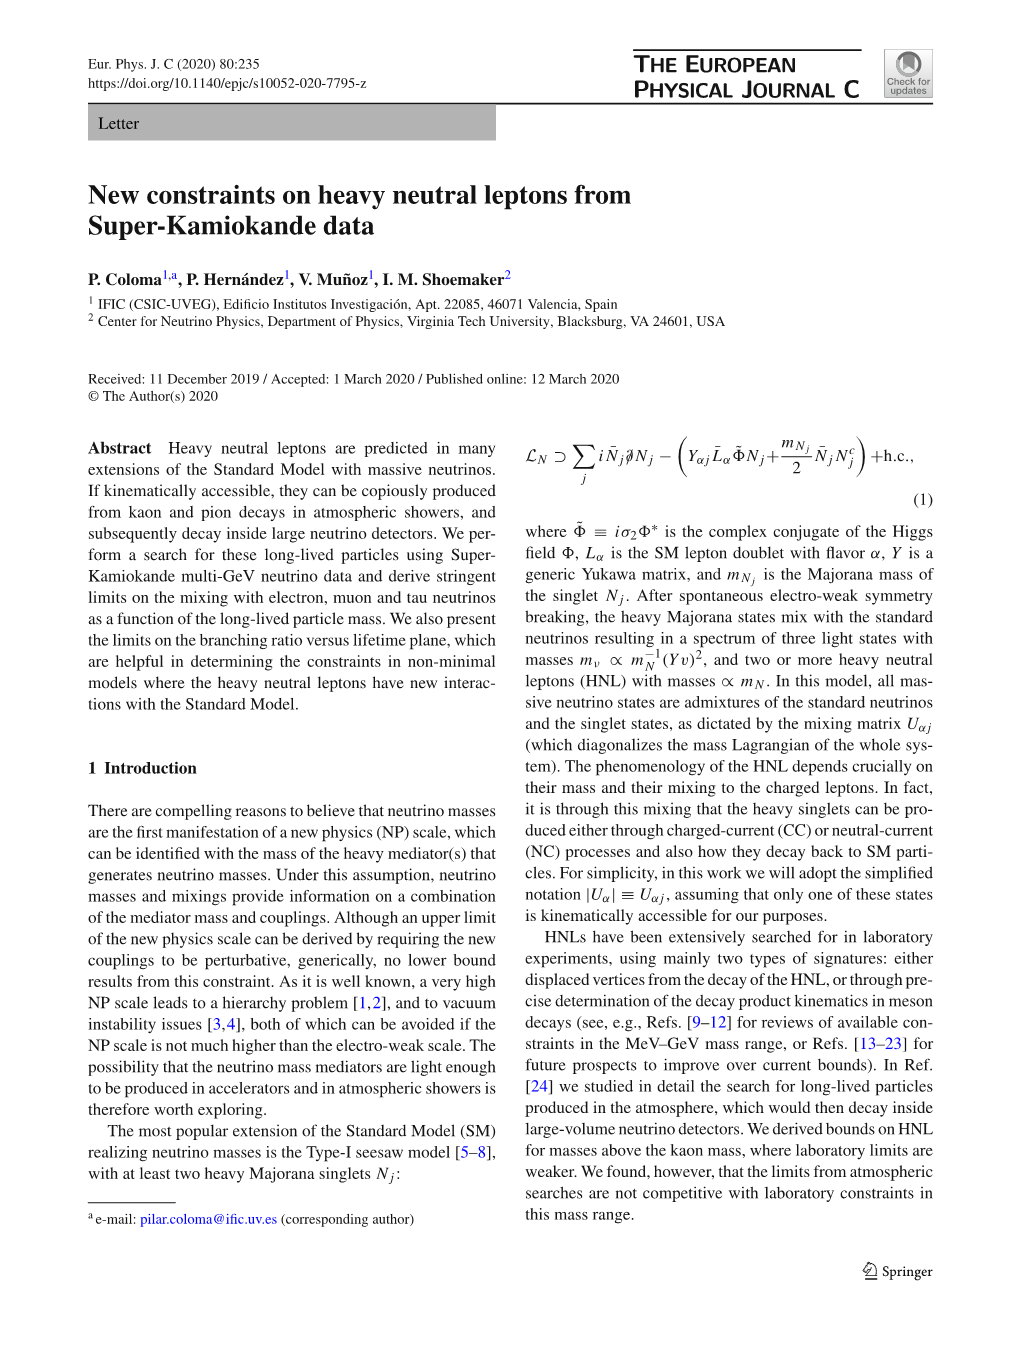 New Constraints on Heavy Neutral Leptons from Super-Kamiokande Data